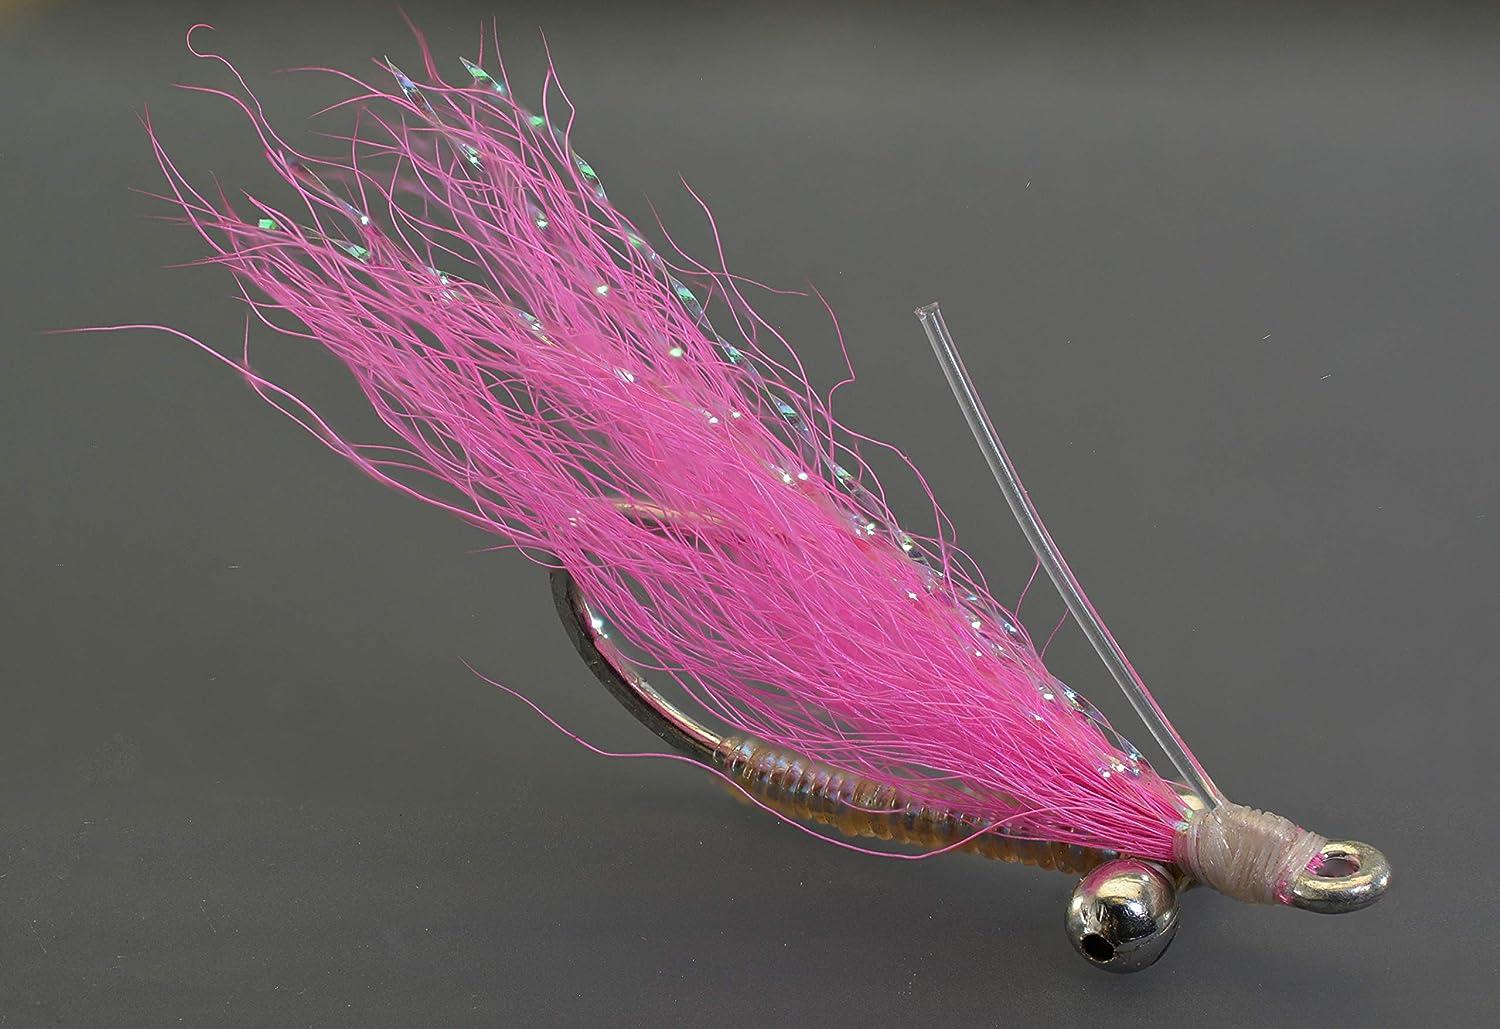 Crazy Charlie Saltwater Fly Fishing Flies - Choose from White, Pink,  Crystal, Tan & Chartreuse - Hand Tied on Mustad Signature Duratin Fly Hooks  Sizes #2, #4 & #6 20ct 5 Color